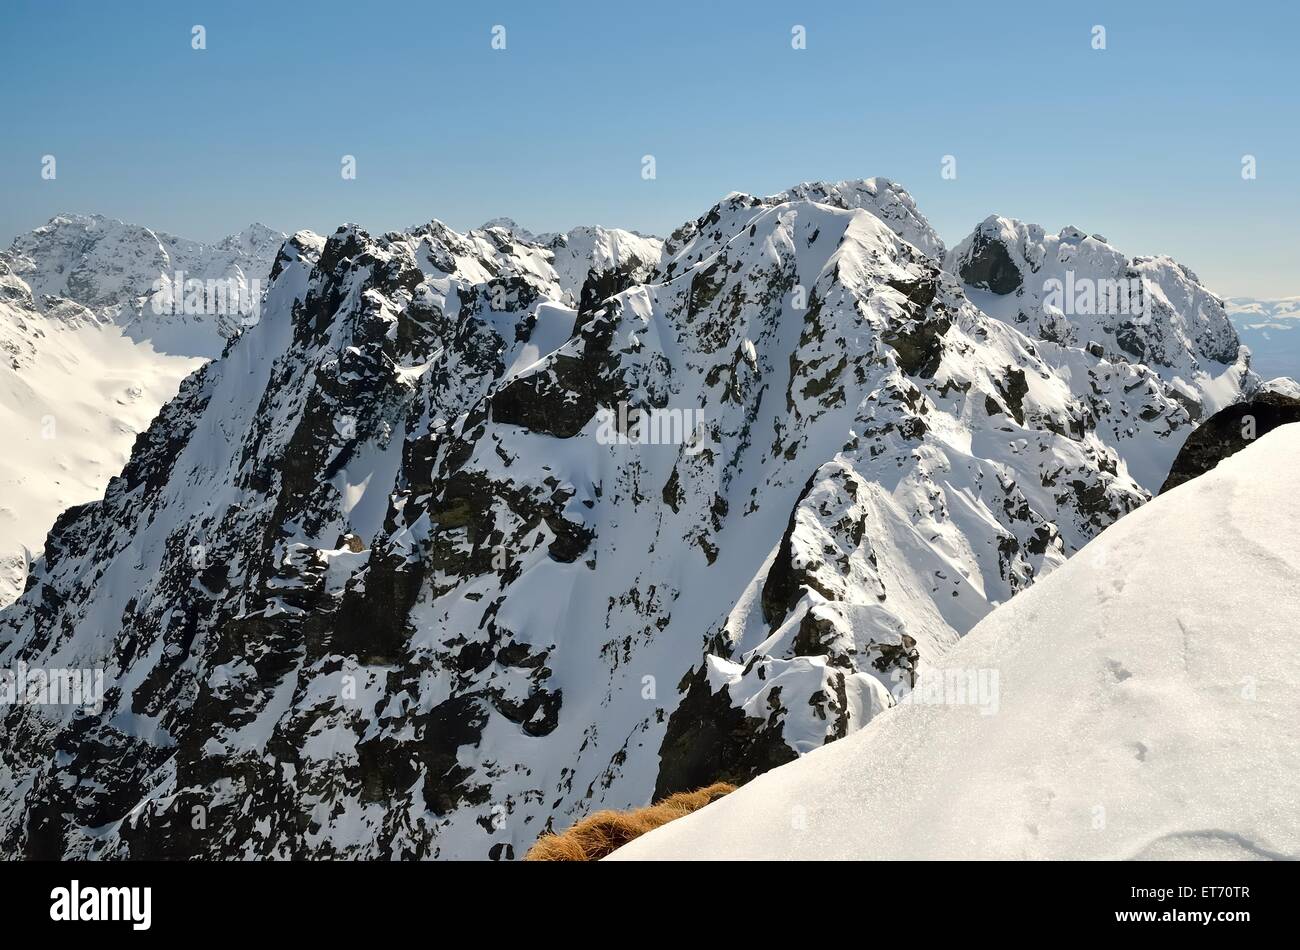 Winter landscape in mountains. View from the ridge over steep slopes and snowy peaks, National Park in Tatra Mountains. Stock Photo